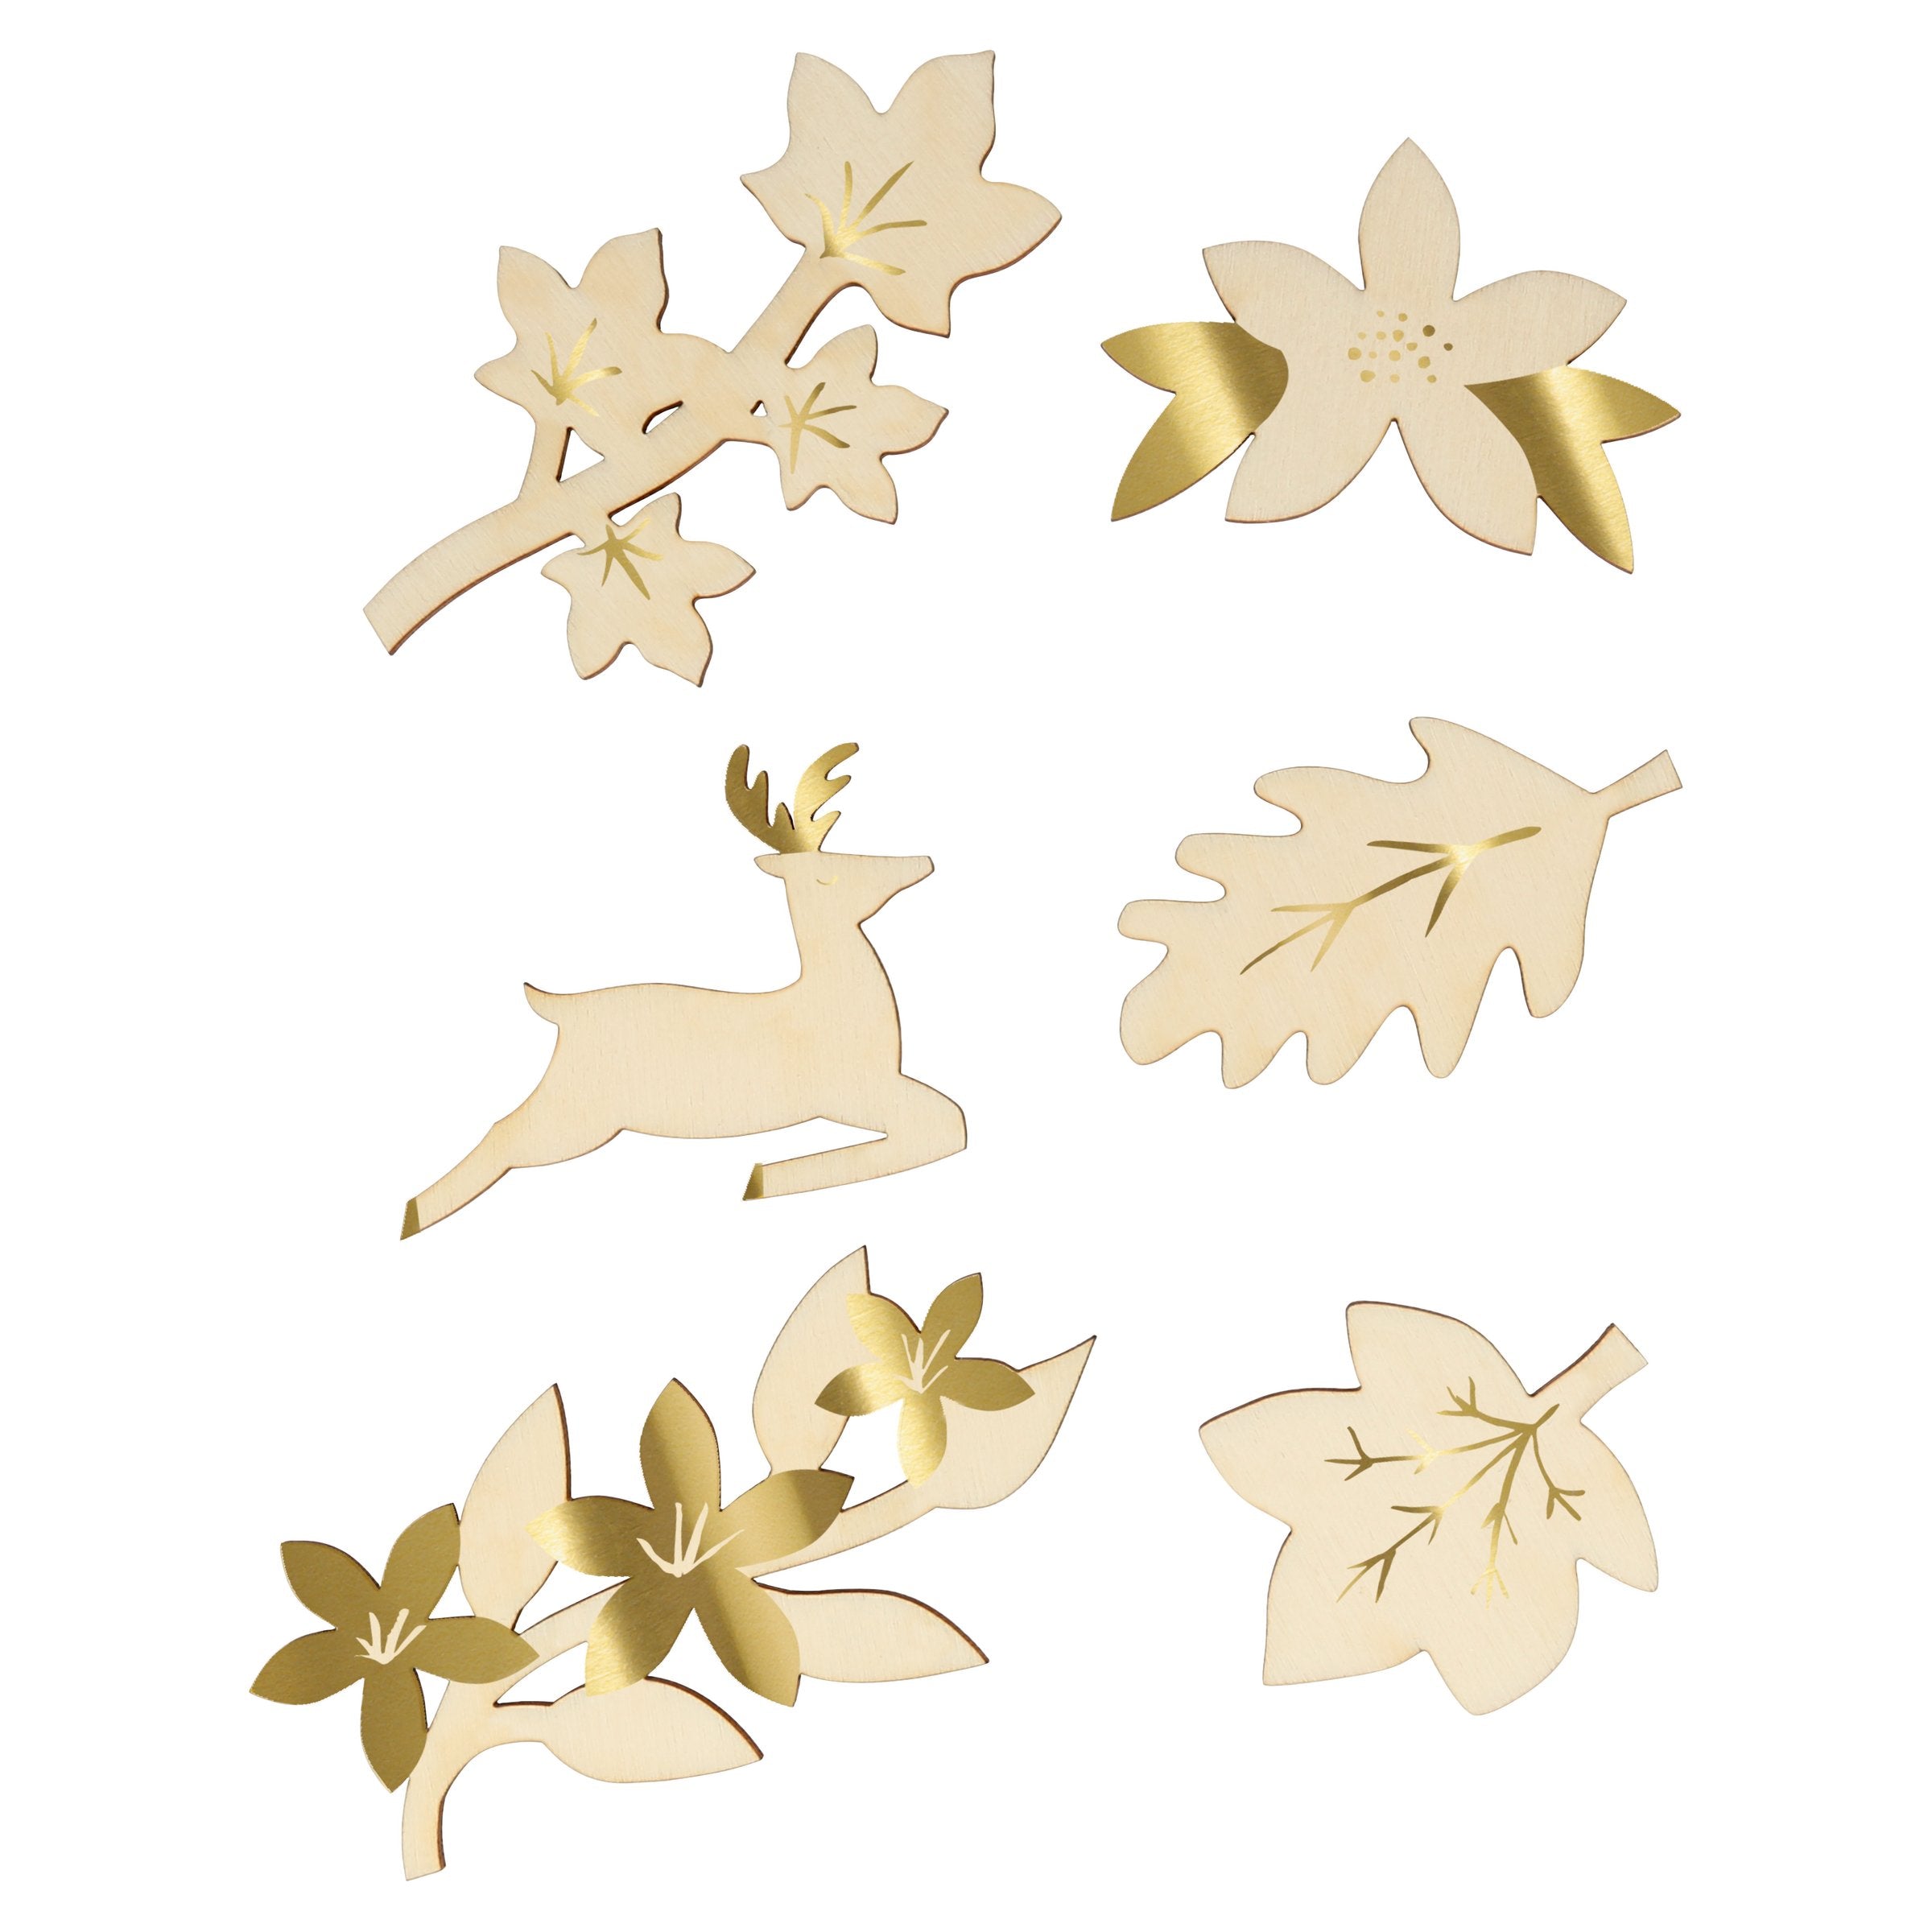 These Christmas crackers have beautiful tissue paper flowers and gold foil leaves.